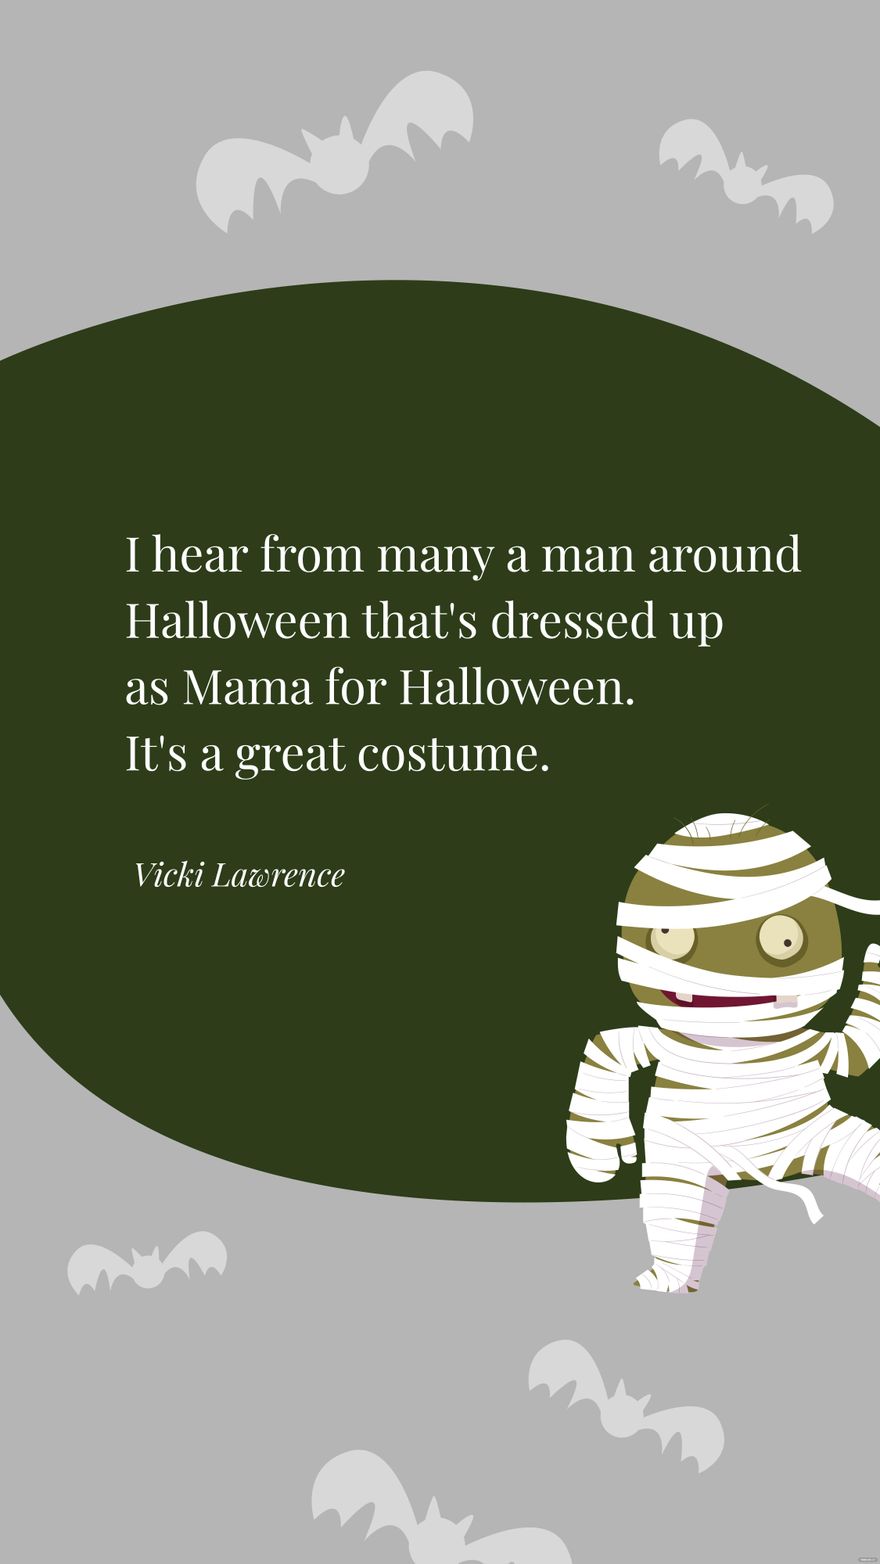 Free Vicki Lawrence- I hear from many a man around Halloween that's dressed up as Mama for Halloween. It's a great costume.  in JPG